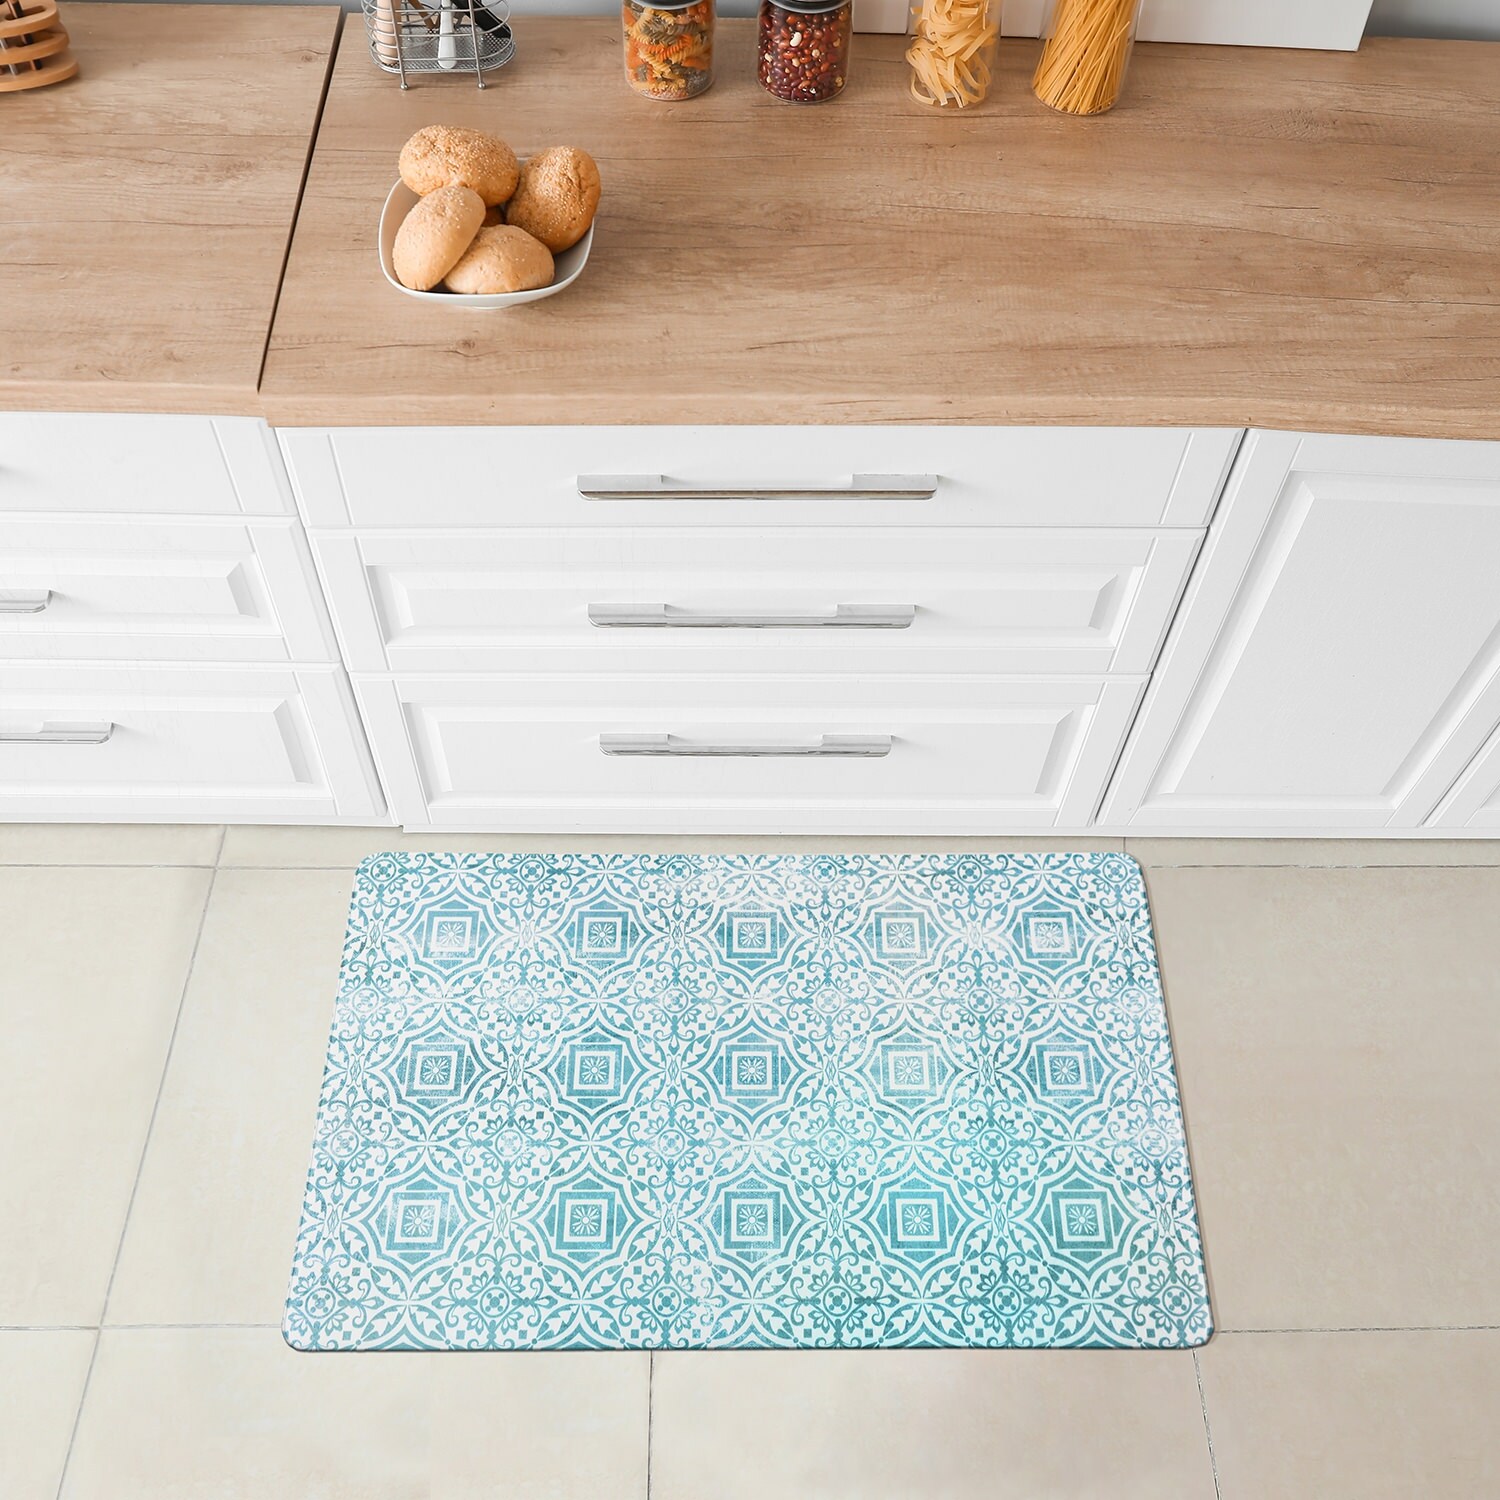 https://ak1.ostkcdn.com/images/products/is/images/direct/2d6fae7fcdea82046169aa5adb5f50ee968c62c0/Boho-Tile-Anti-Fatigue-Standing-Mat.jpg